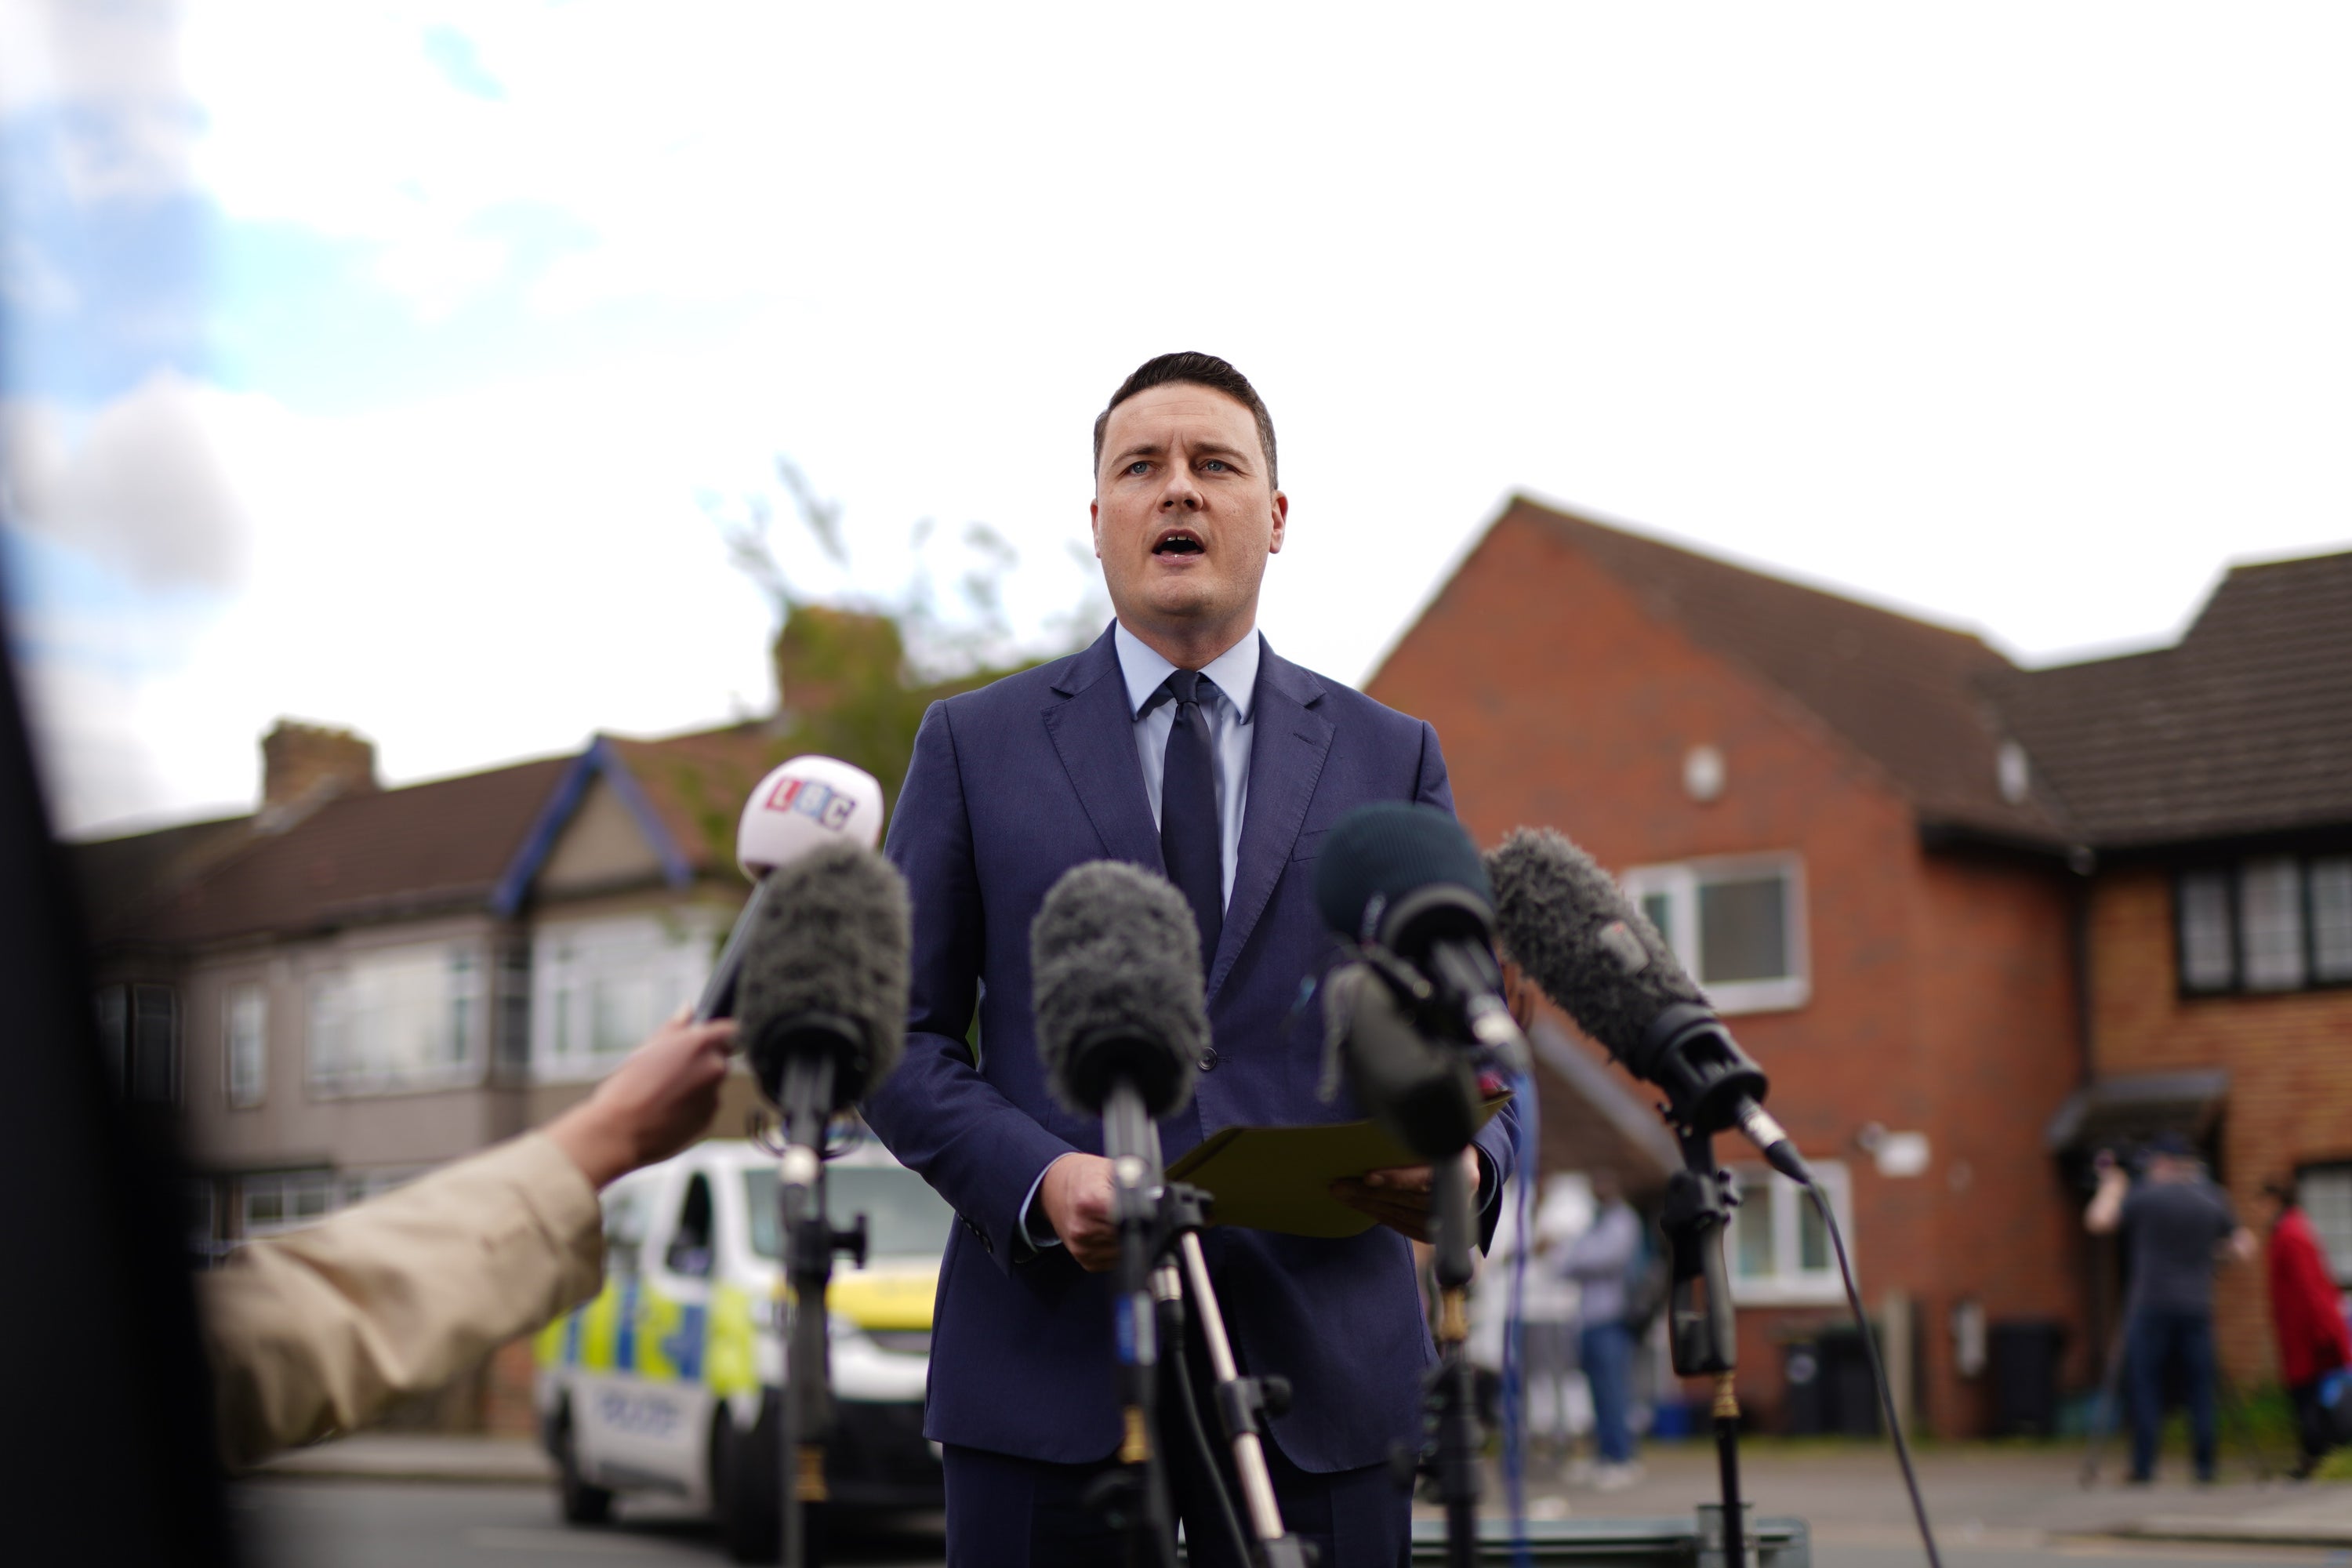 Wes Streeting made a controversial attack against Ms Hall on X (formerly Twitter)